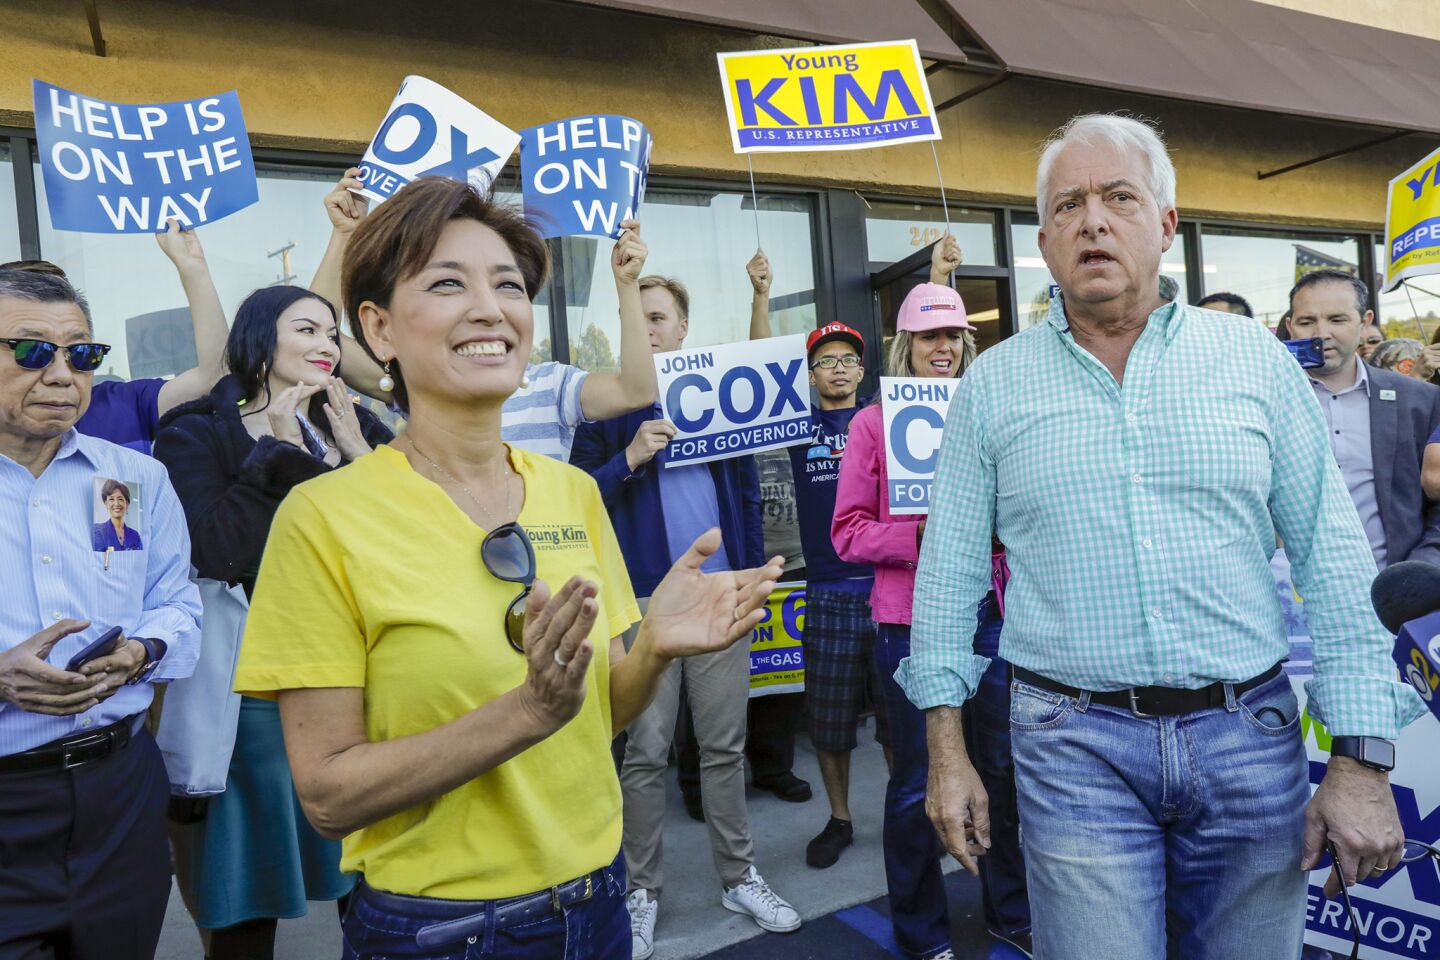 Congressional candidate Young Kim, left, attends rally with gubernatorial candidate John Coxin Rowland Heights.